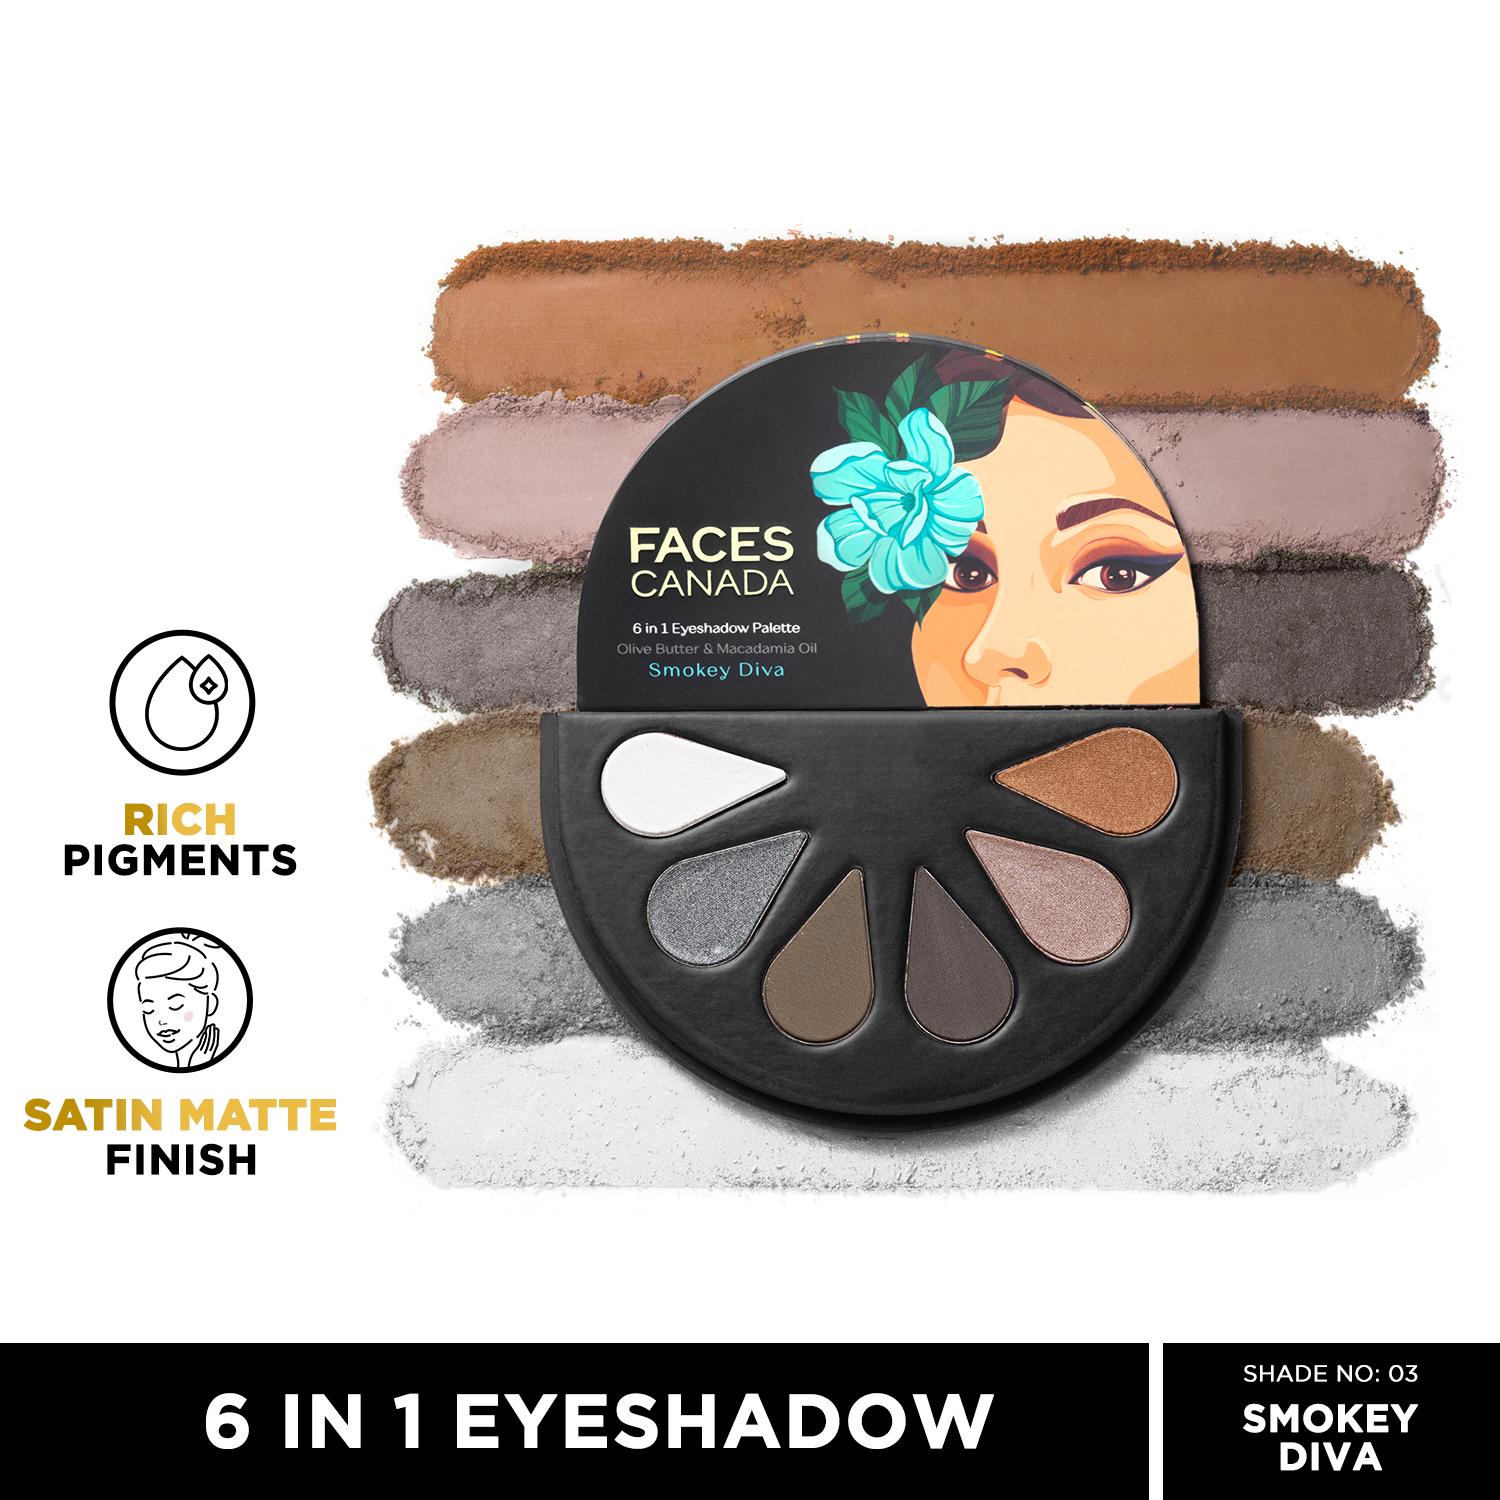 Faces Canada | Faces Canada 6 in 1 Eyeshadow Palette - Smokey Diva 03, Olive Butter & Macadamia Oil (6 g)